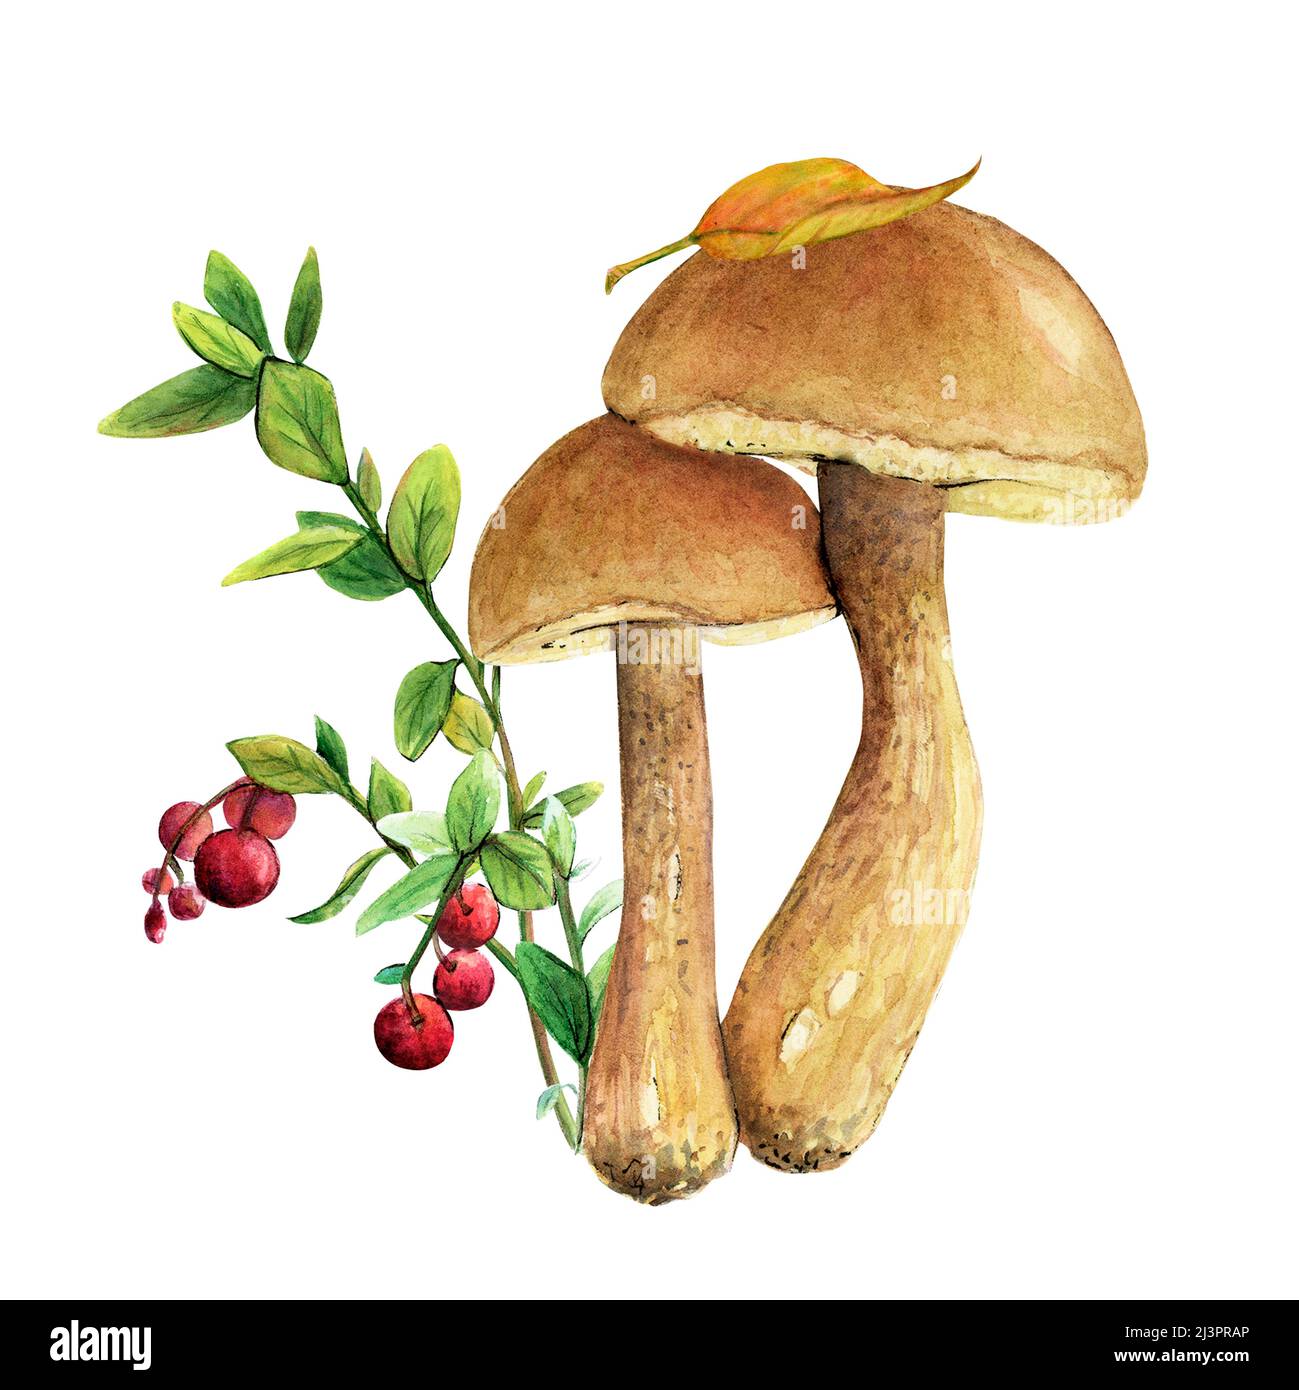 Watercolor illustration of a mushroom - a boletus with litters and a brown cap. Stock Photo